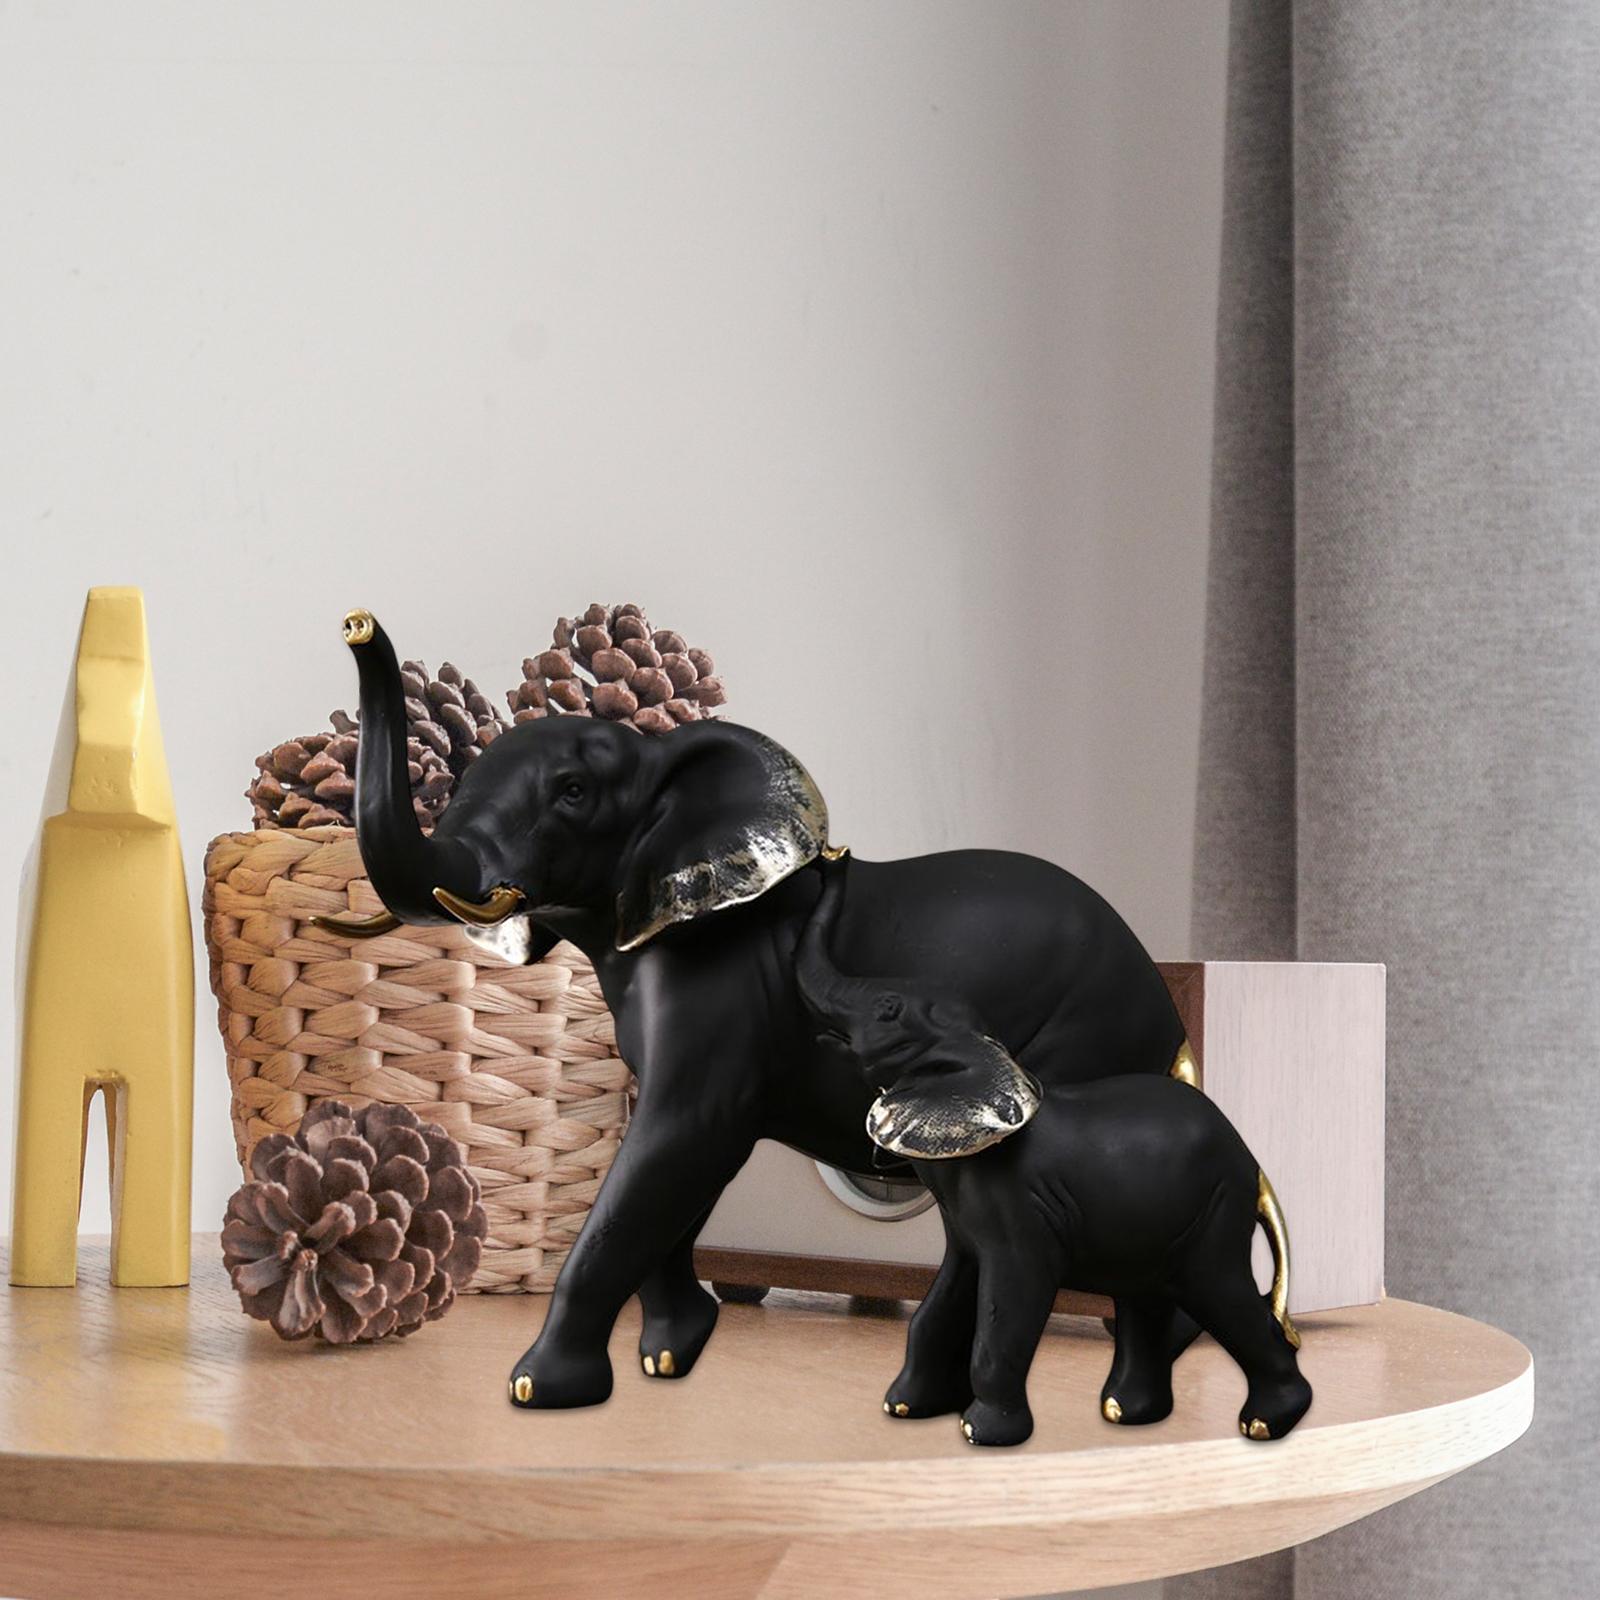 Resin Figurines Sculpture Elephant Statues for Wedding Bedroom New Year Home Black With Kids